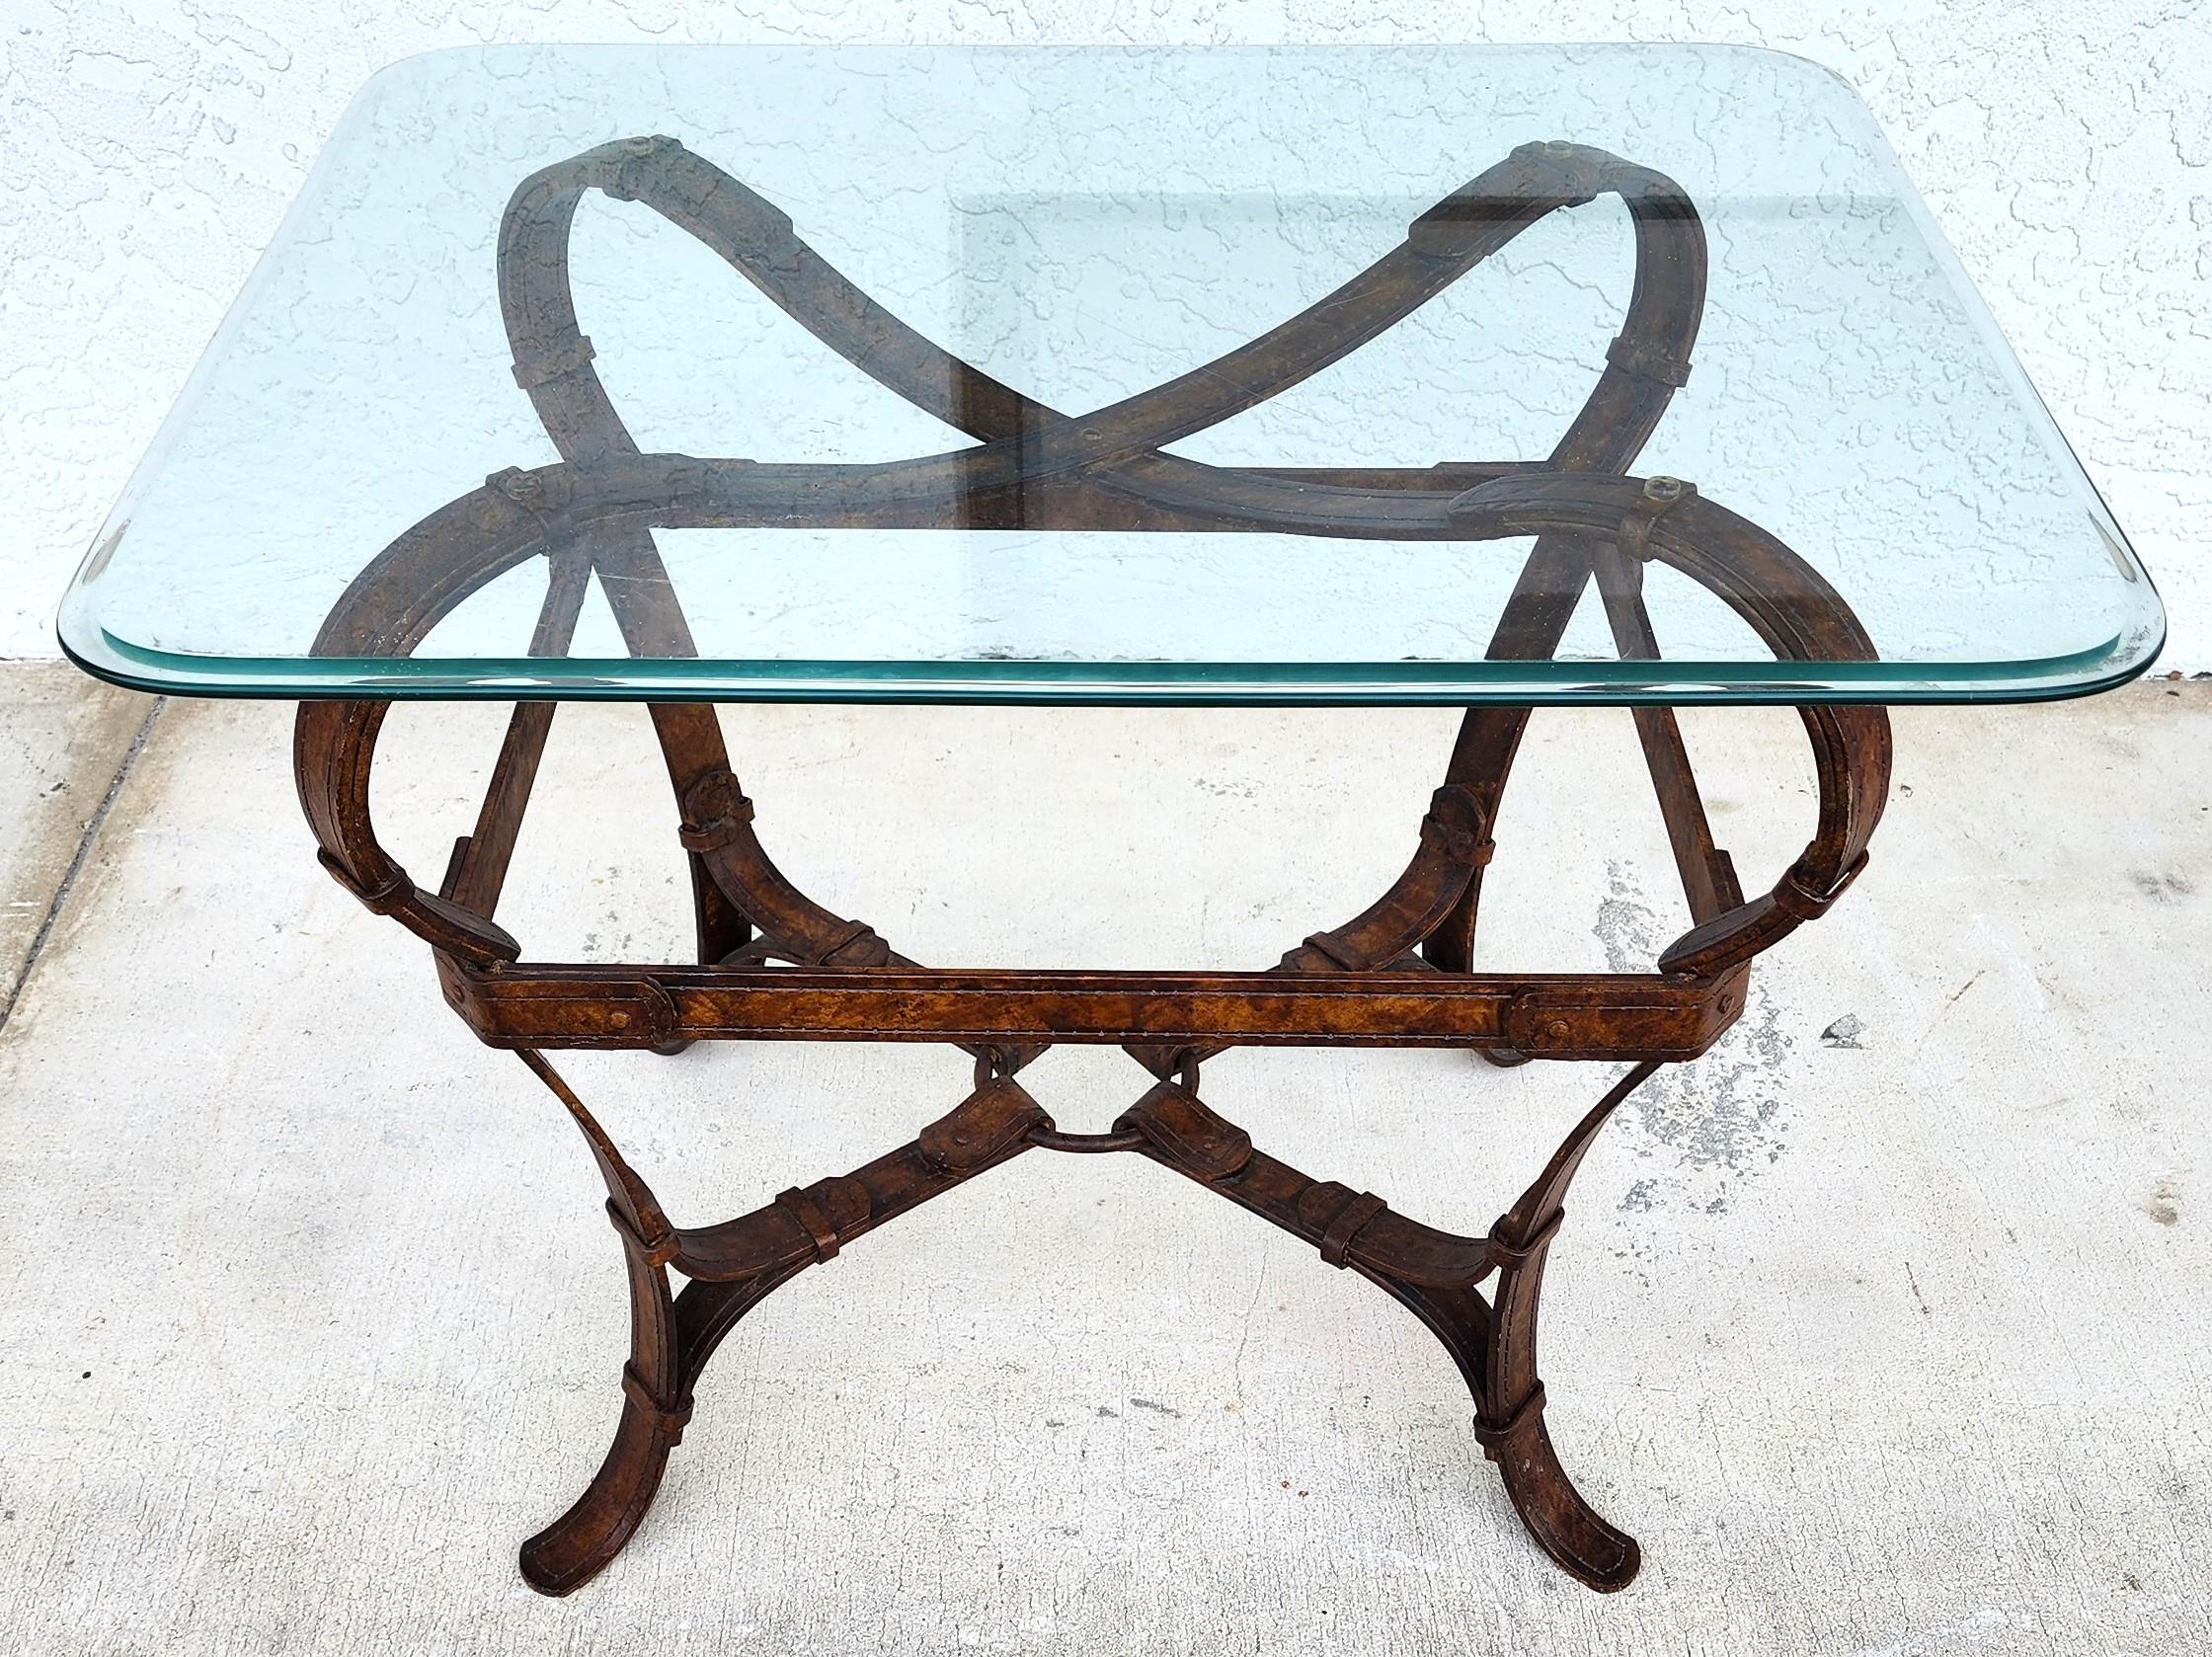 For FULL item description click on CONTINUE READING at the bottom of this page.

Offering One Of Our Recent Palm Beach Estate Fine Furniture Acquisitions Of A unique rustic, ranch, or lodge-style table in the Hermes, or Jacques Adnet style. The iron